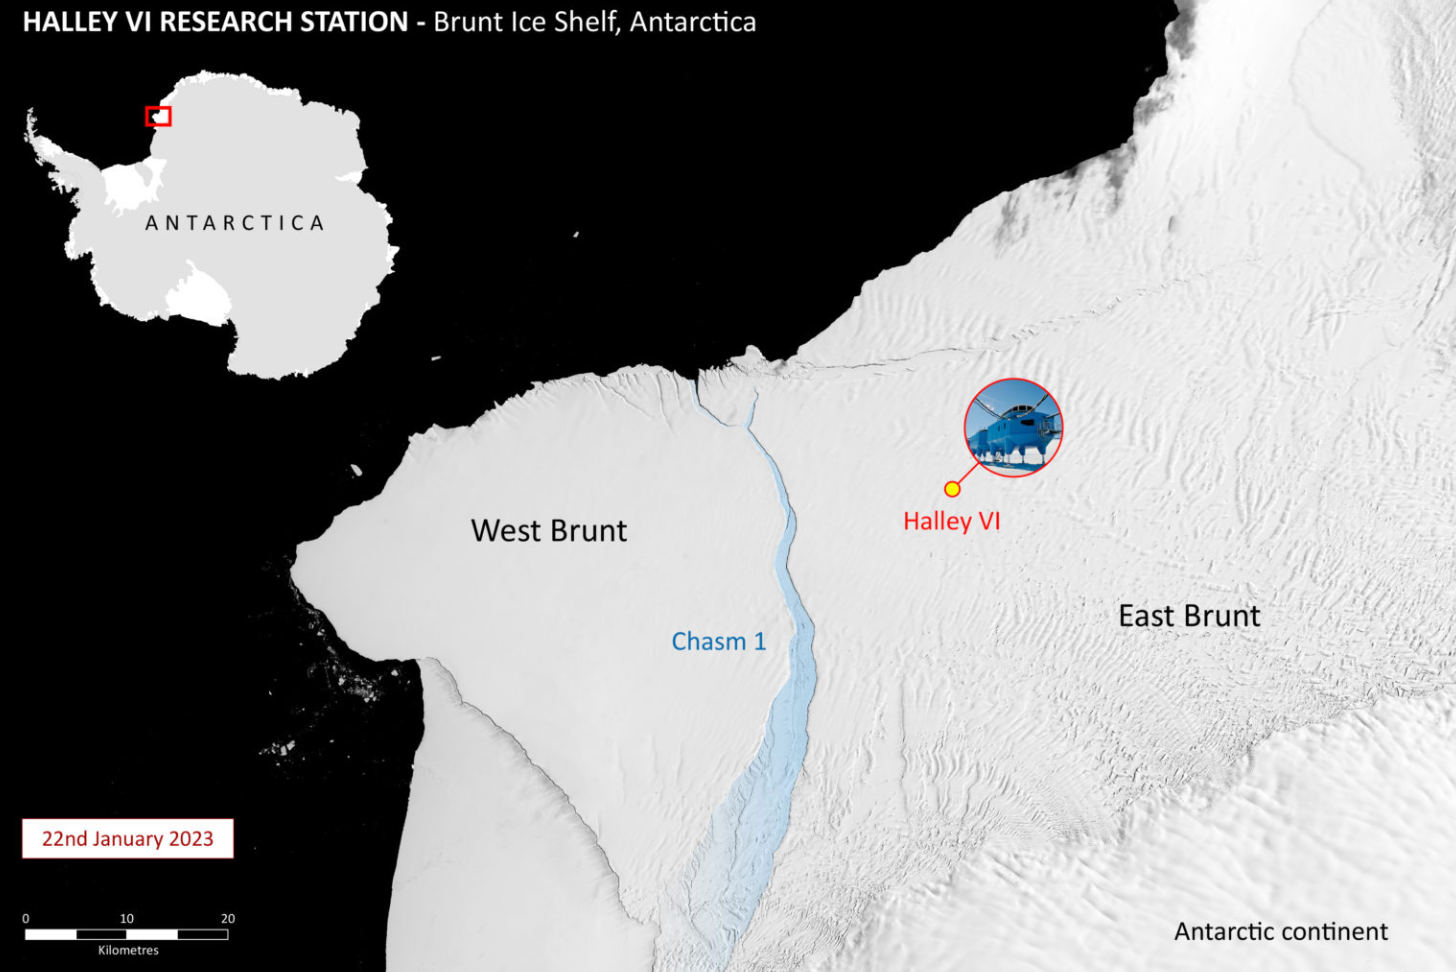 A map shows the location of Chasm 1 on the Brunt Ice Shelf